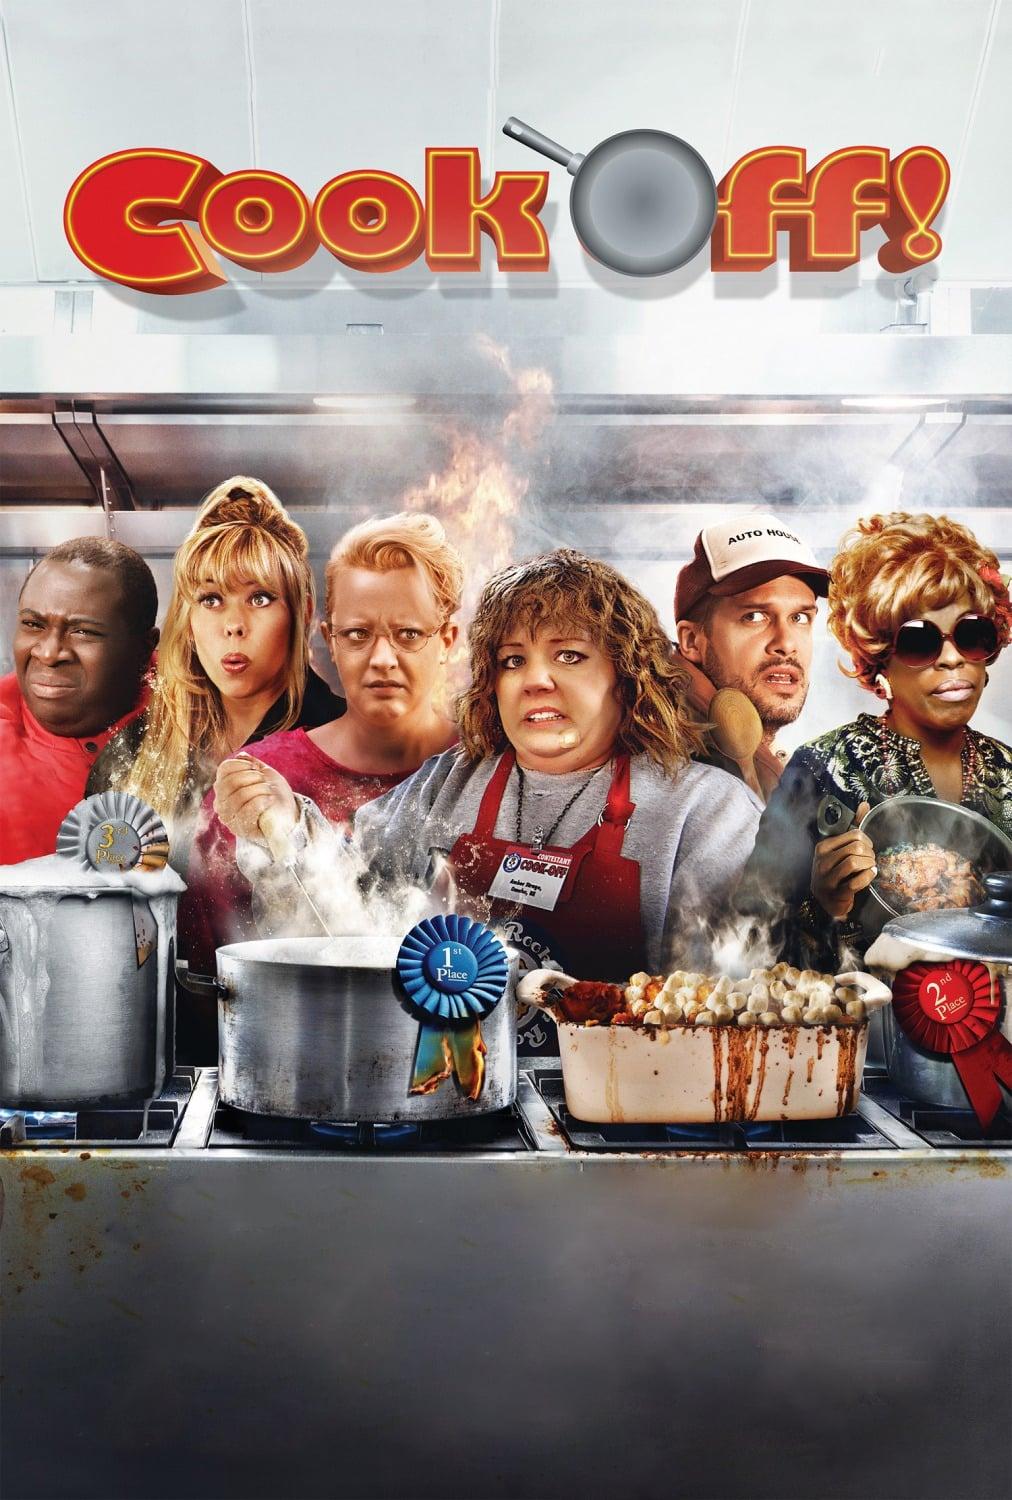 Cook-Off! poster